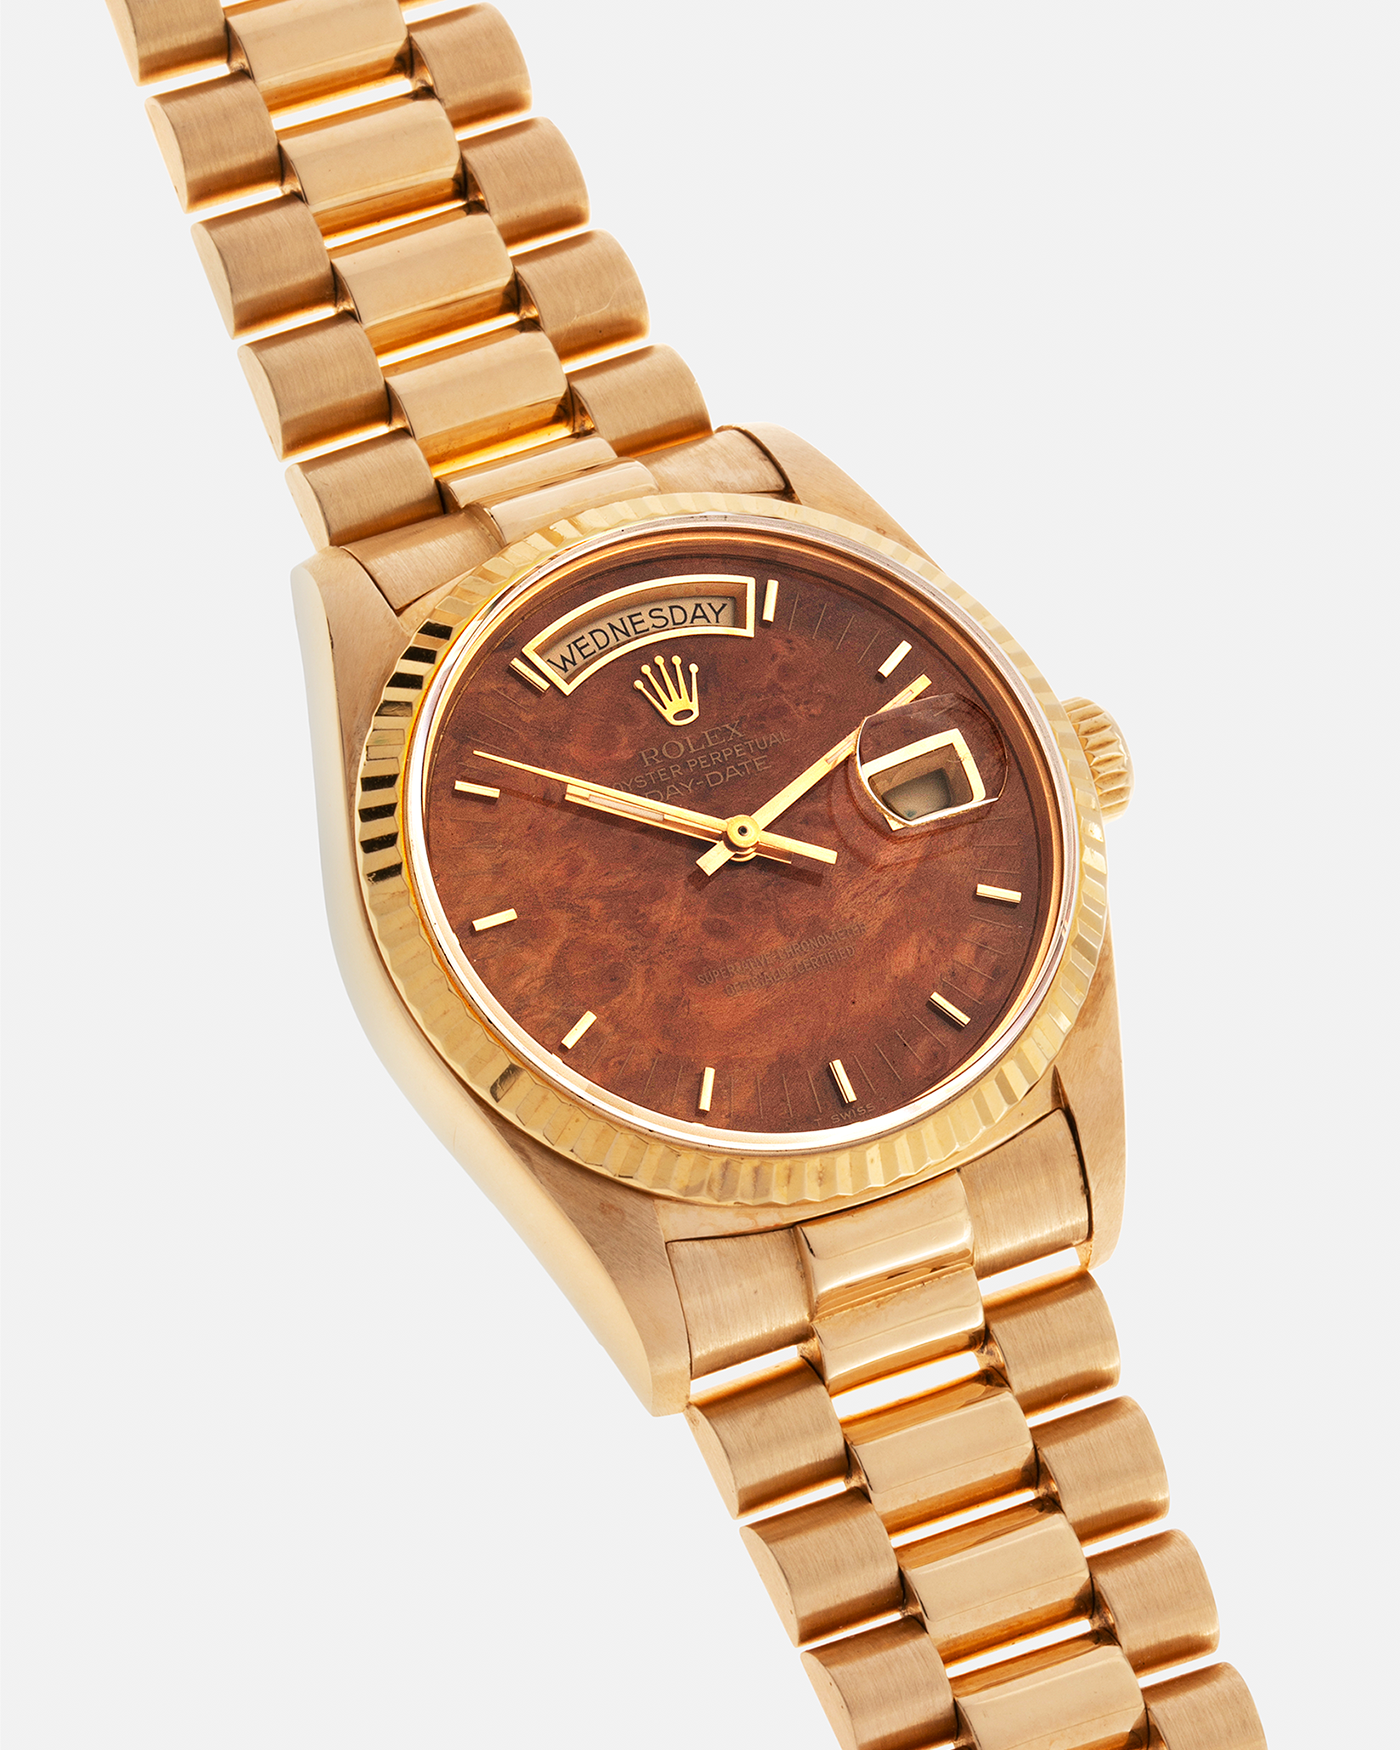 Brand: Rolex Year: 1988 Model: Day Date Reference Number: 18038 Serial Number: R586XXX Material: 18-carat Yellow Gold, ‘Burl Wood’ Dial Movement: Rolex Cal. 3055, Self-Winding Case Diameter: 36mm Lug Width: 20mm Bracelet: Rolex 18-carat Yellow Gold 8385 Presidential Bracelet with 55 Curved End Links